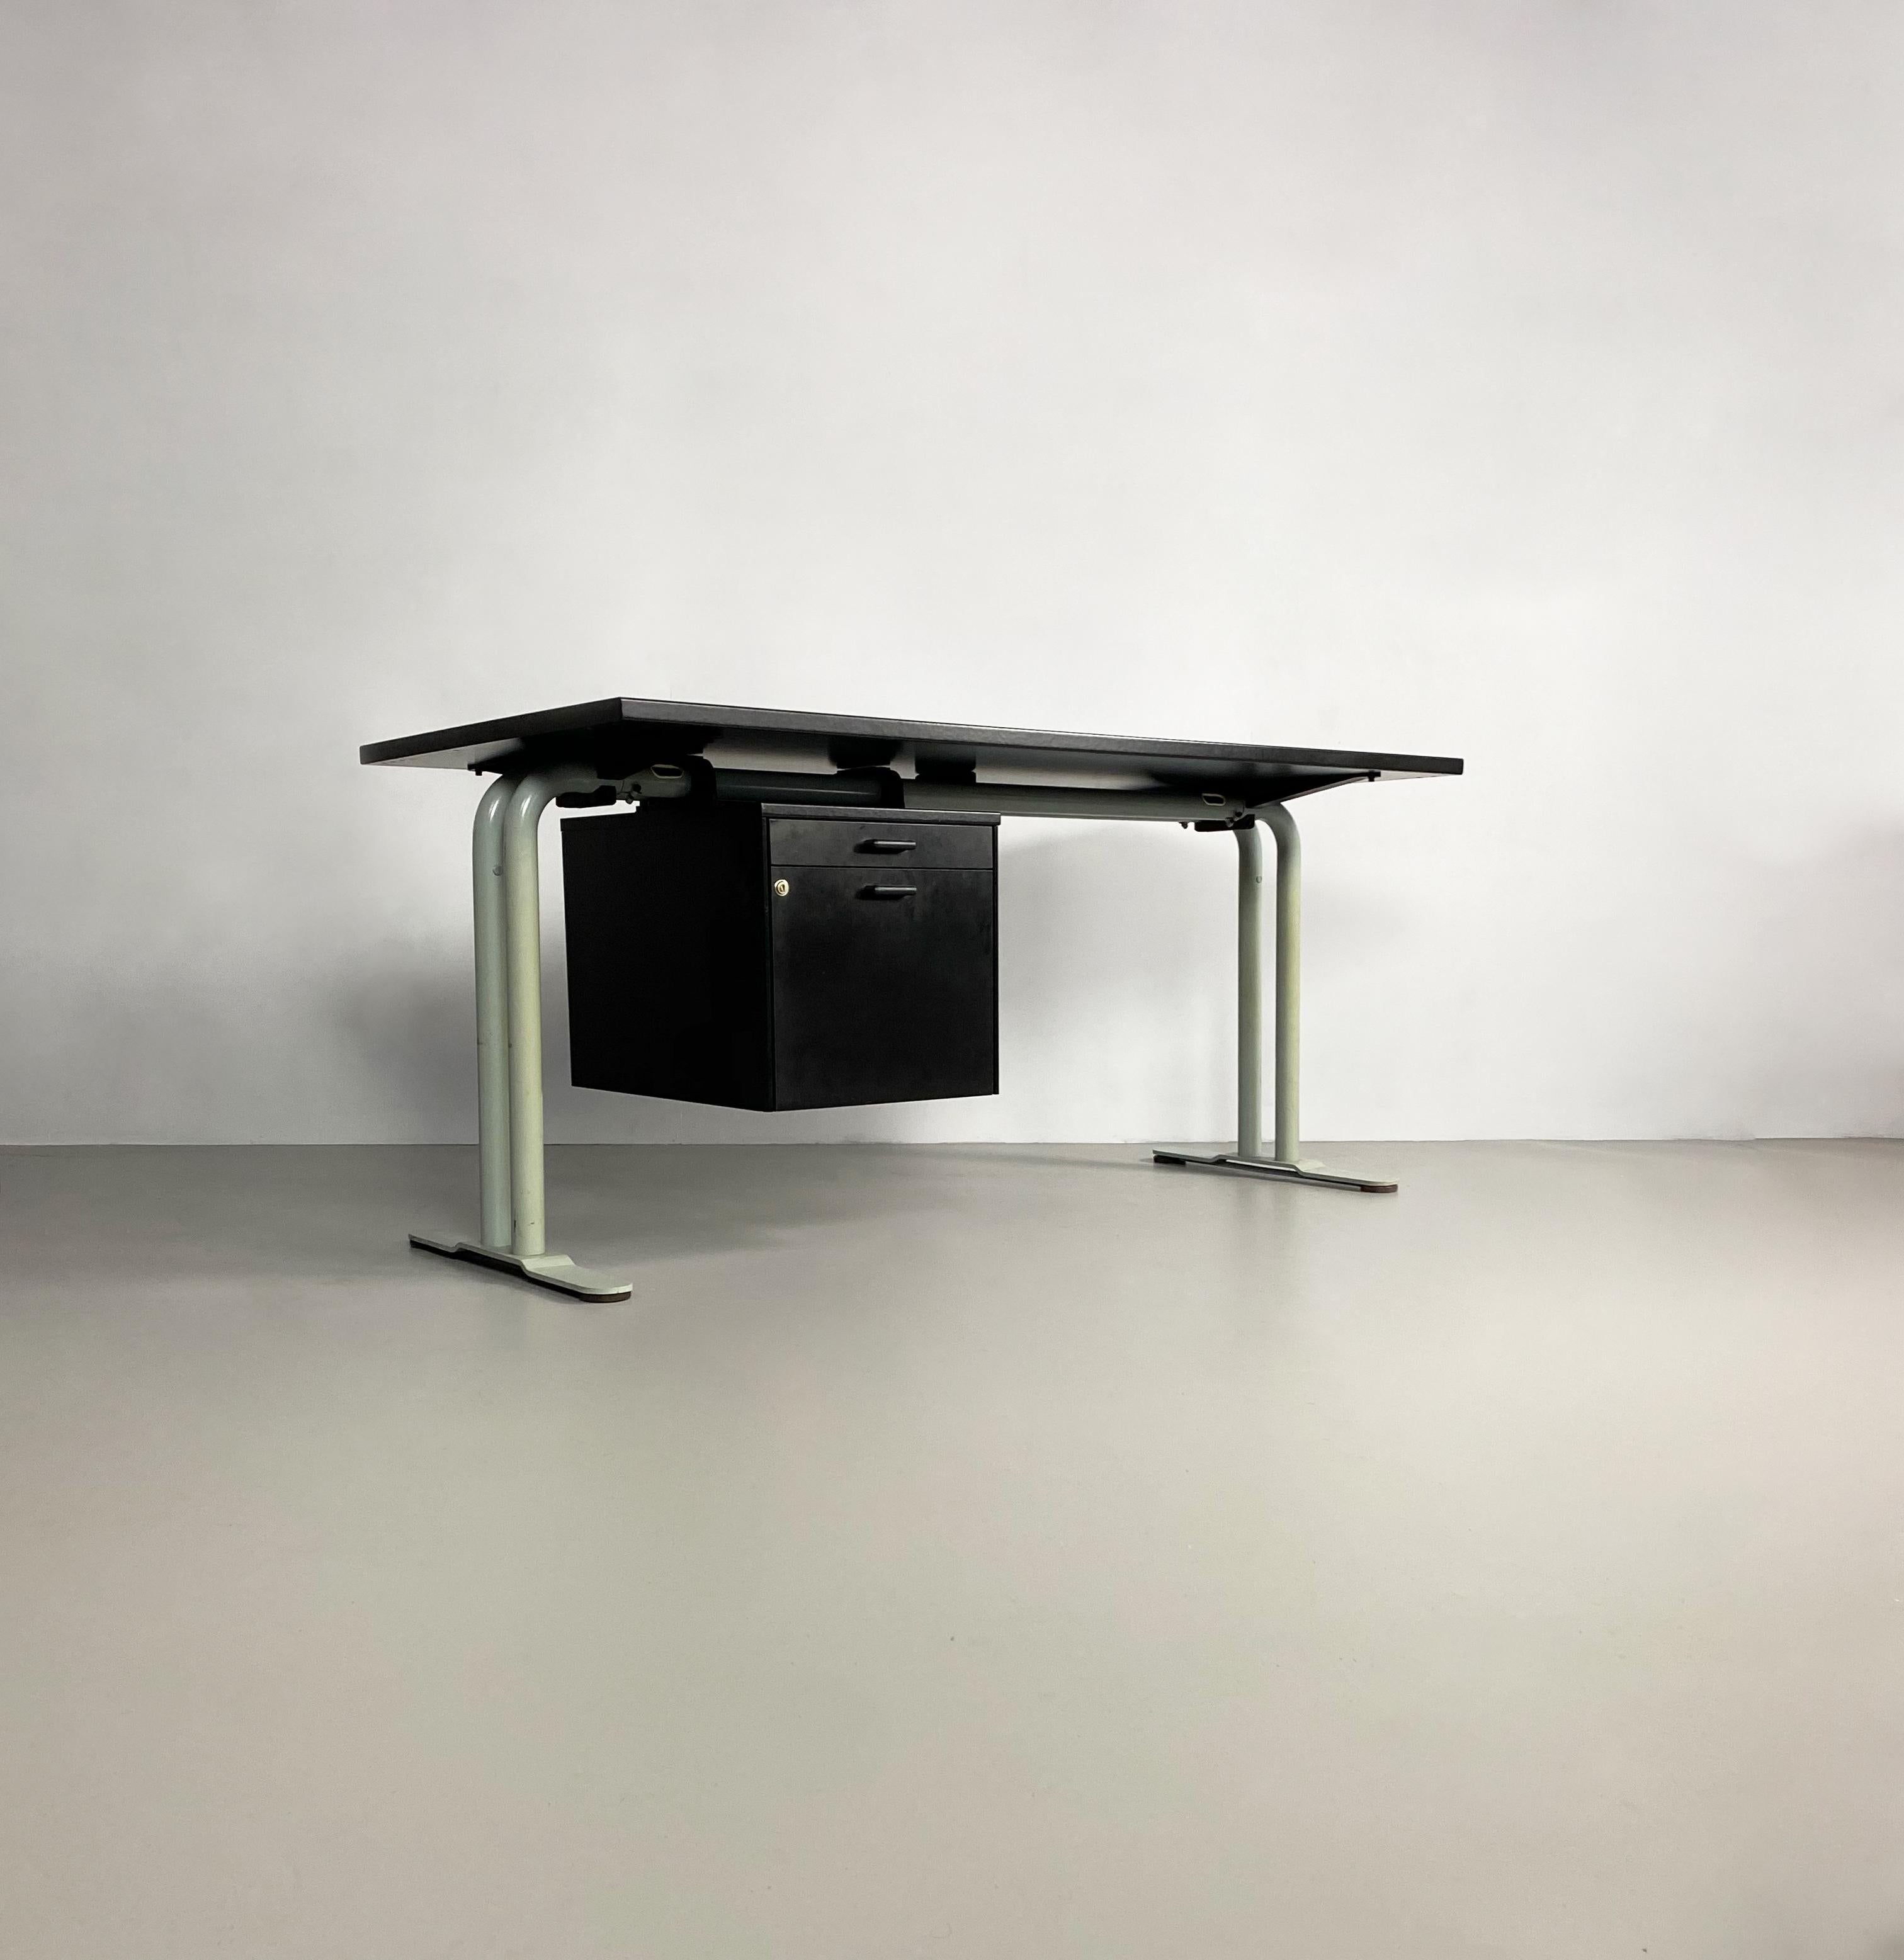 Late 20th century Italian desk by Archiutti featuring thick tubular supporting legs and a suspended bank of drawers.

Dimensions (cm, approx): 
Height: 75 
Width: 160 
Depth: 80

Condition: There are scuffs to the back edges of the desk.